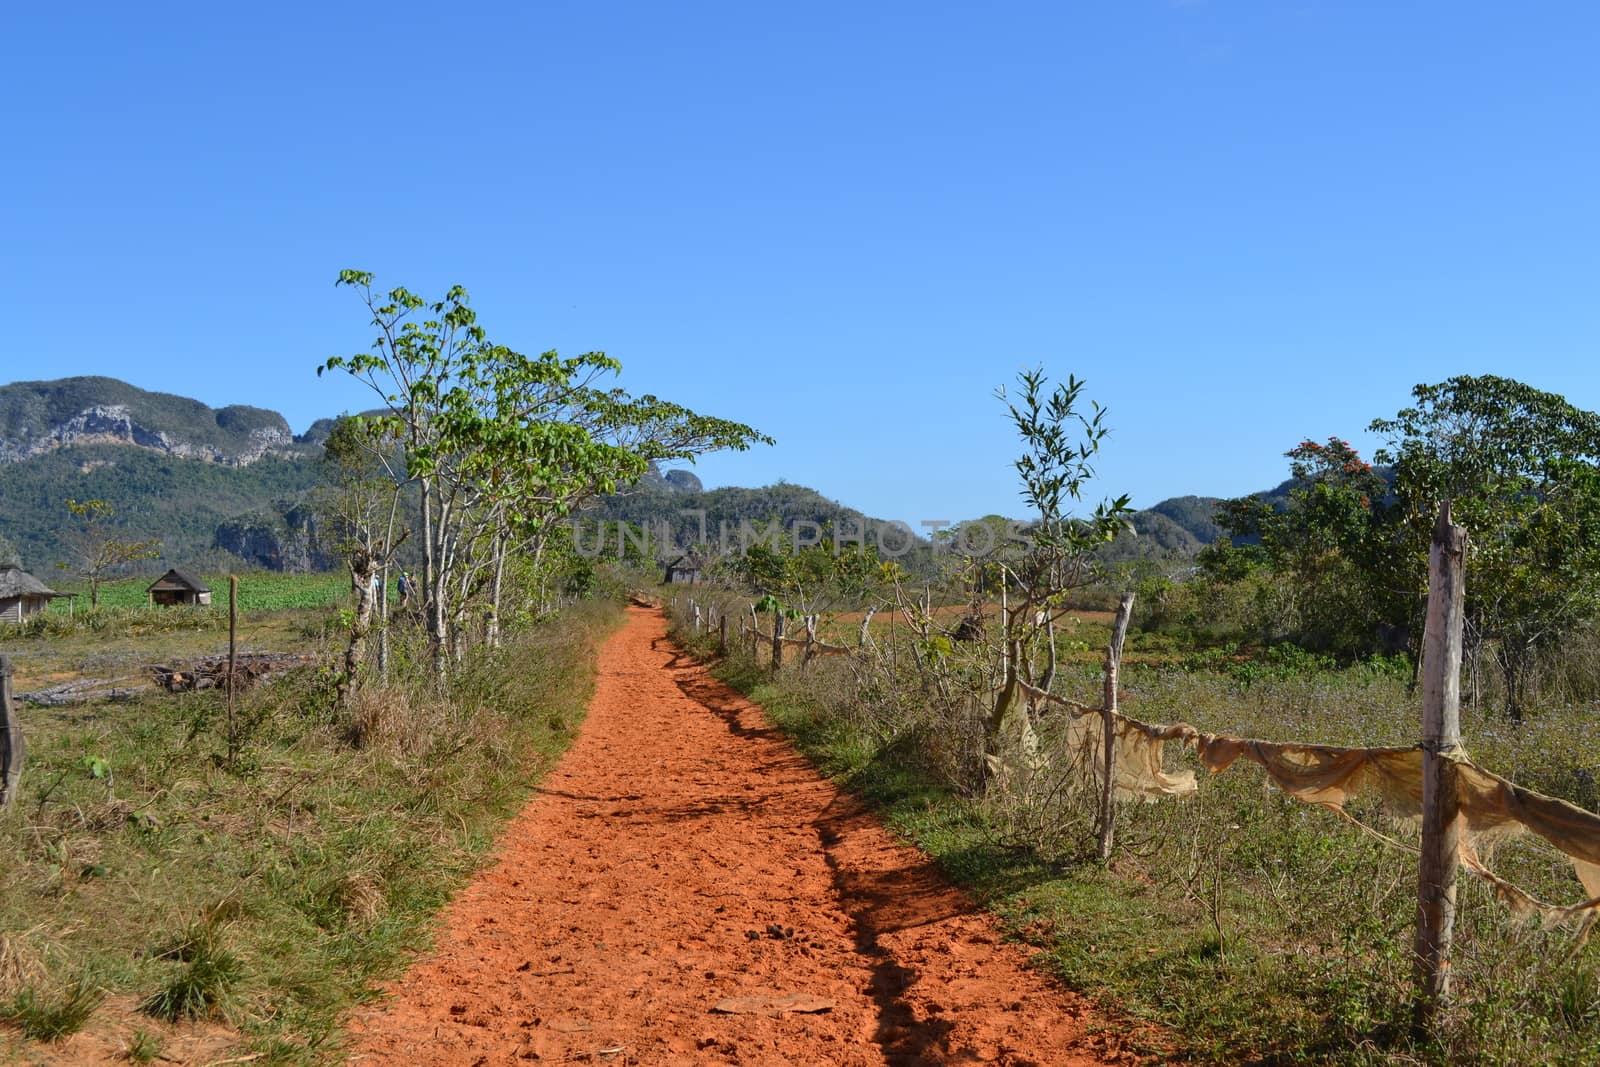 Vinales, Cuba, March 2020: Hiking path through the valley of Vinales, passing coffee plantations in Cuba